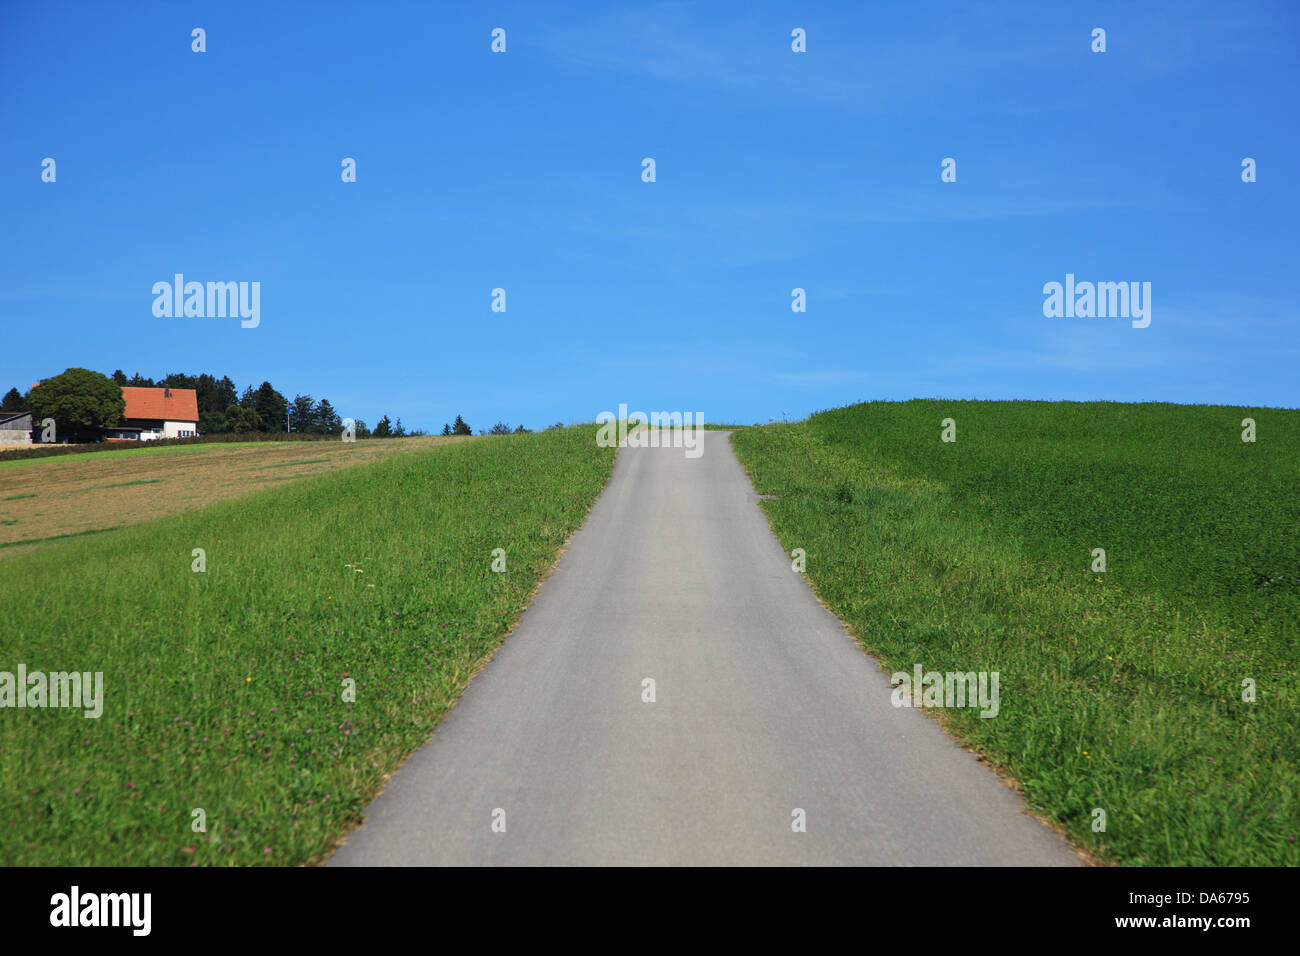 Road, Way, Forward, Horizon, Switzerland, Europe, canton  Lucerne, Rural, Tranquil, Landscape, Scenic, Outdoors, No People, Hori Stock Photo